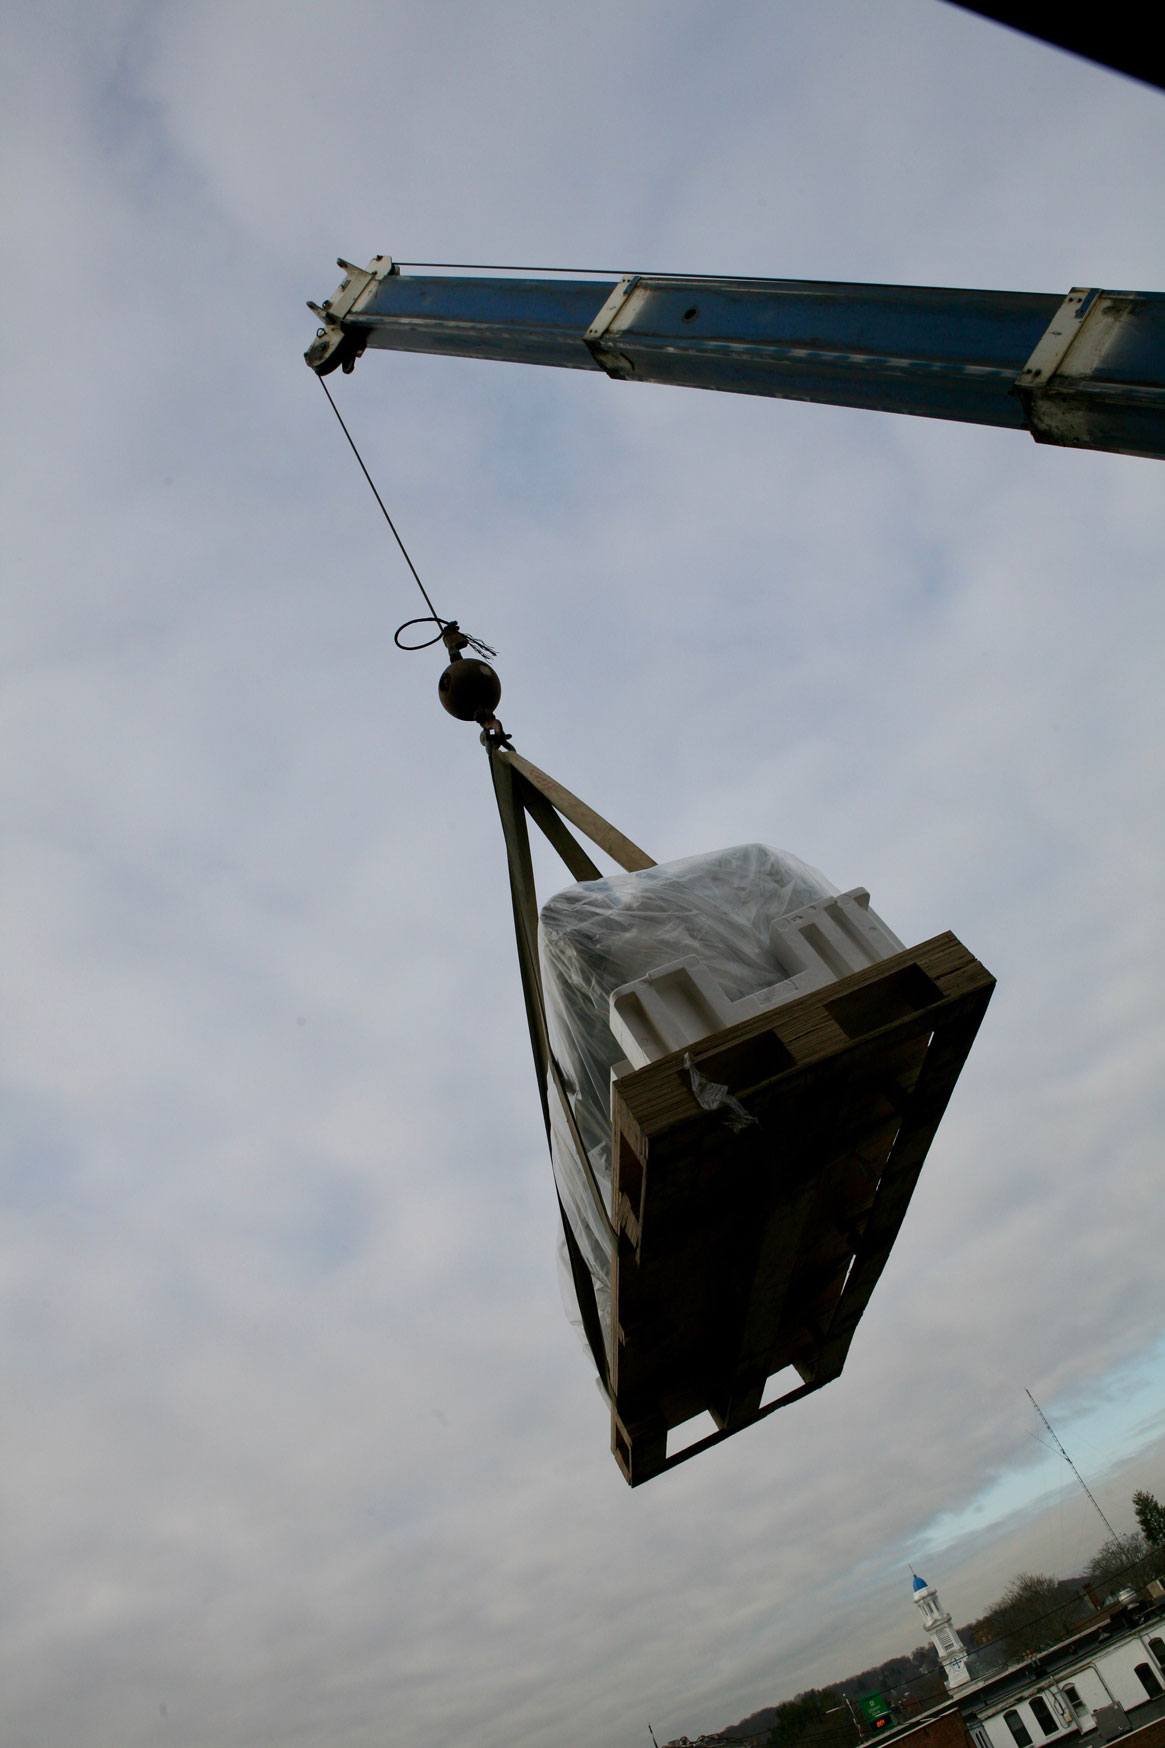 Epson P20000 printer hoisted in the sky by a crane